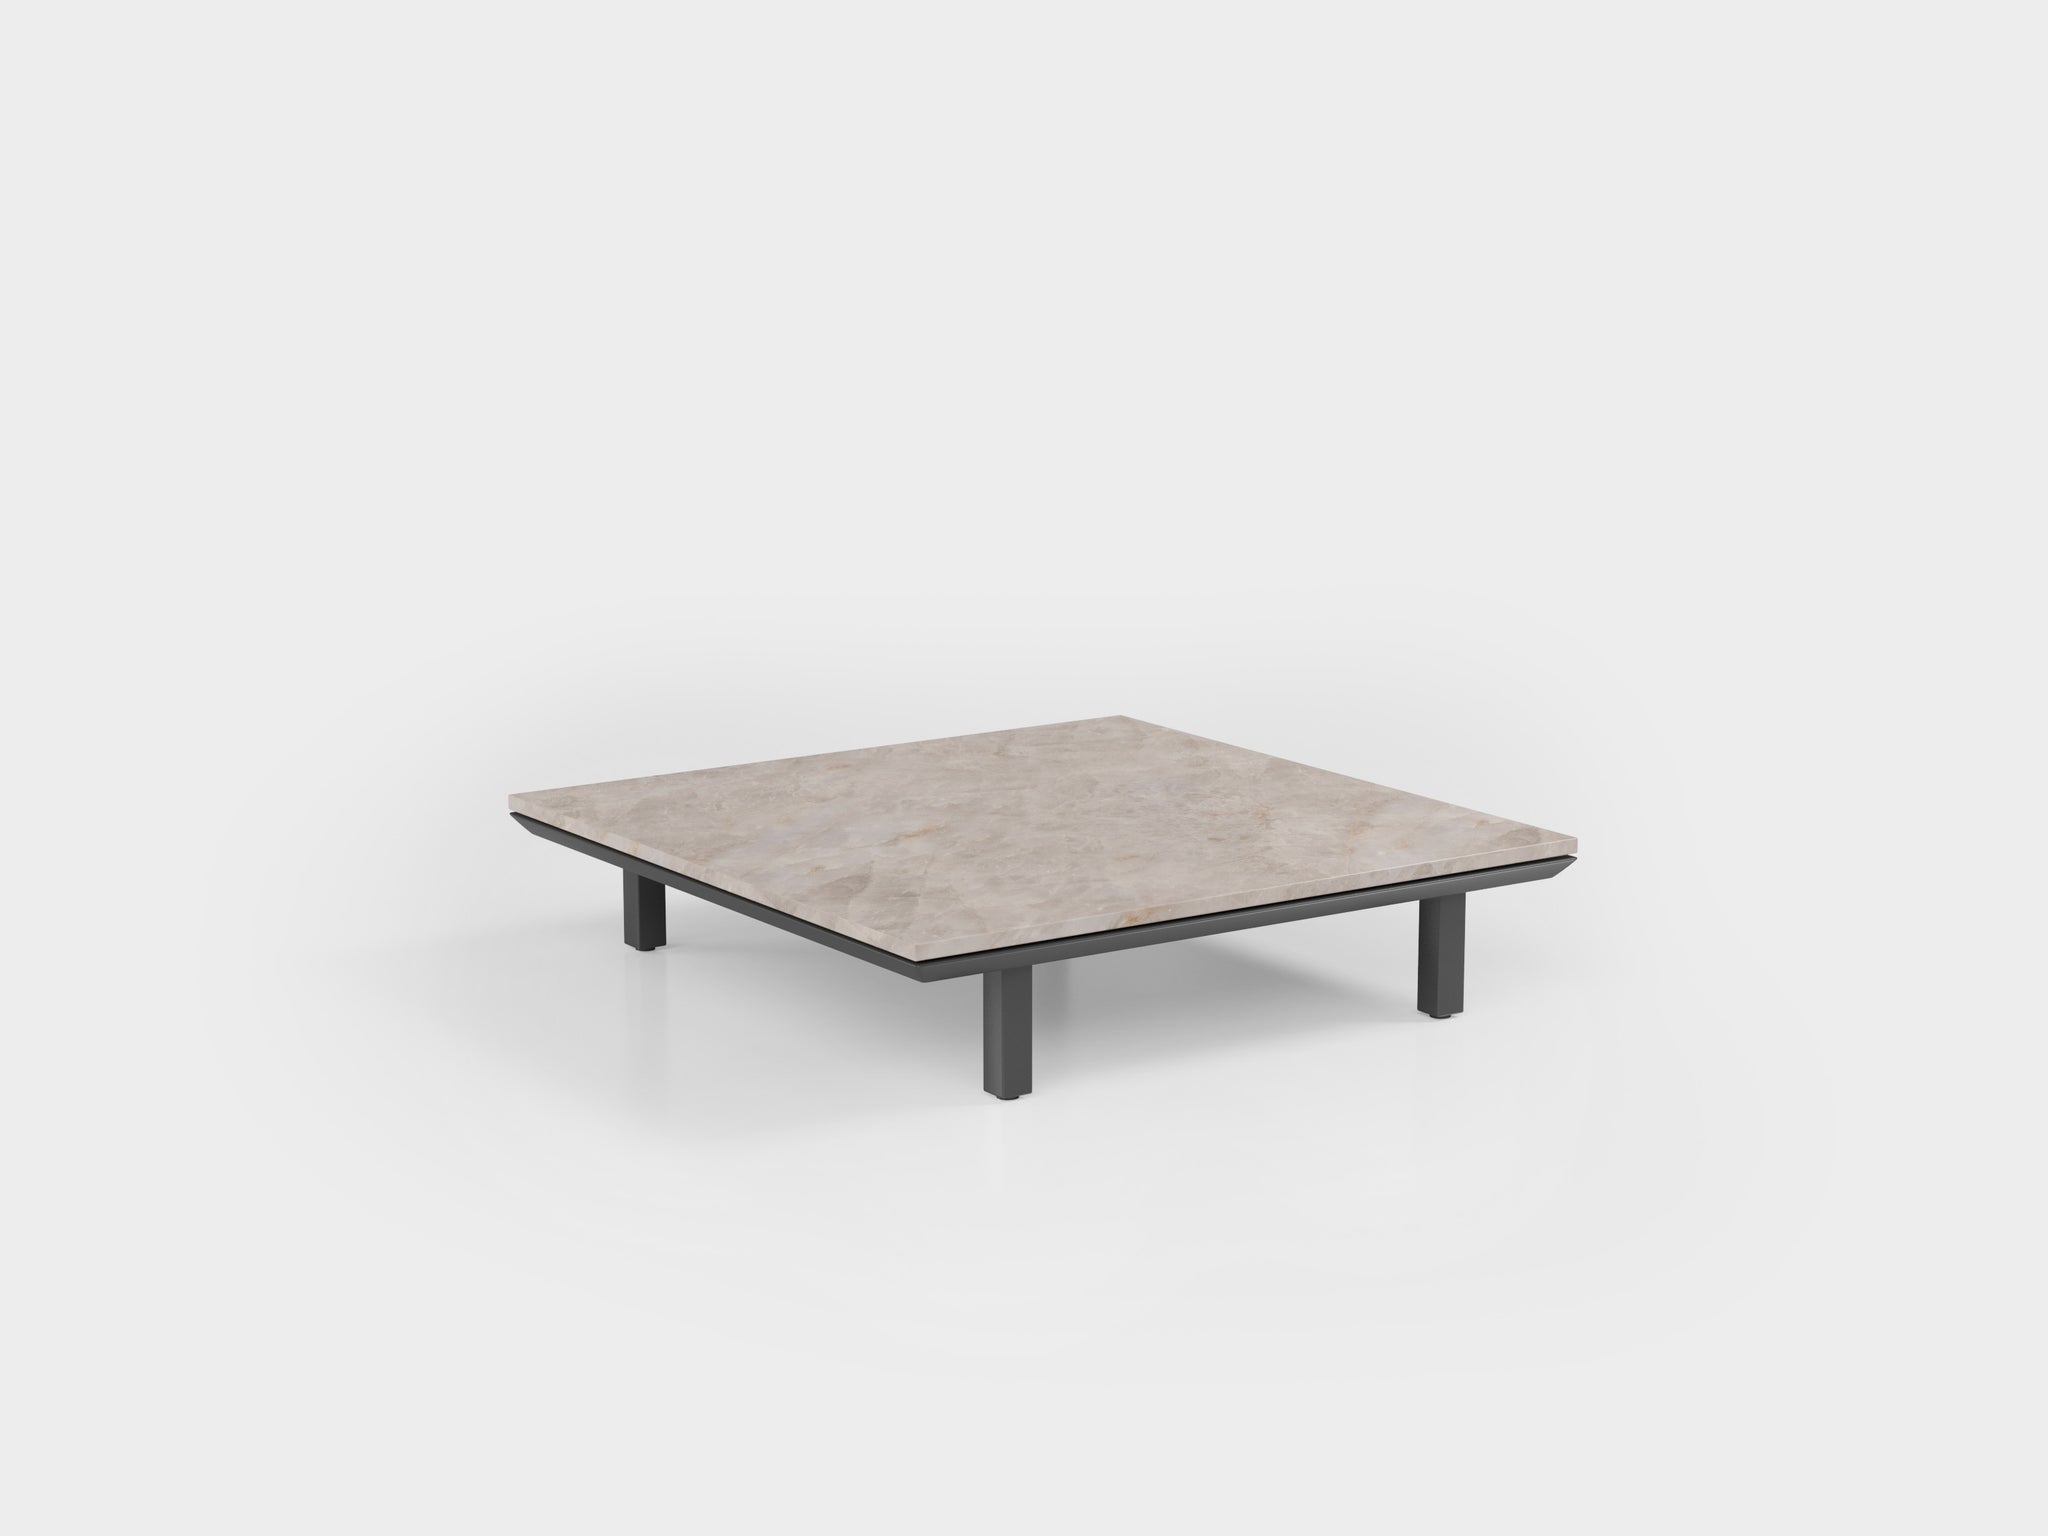 Flex Coffee Table Square with aluminum frames and stone top, designed by Tatiana Mandelli